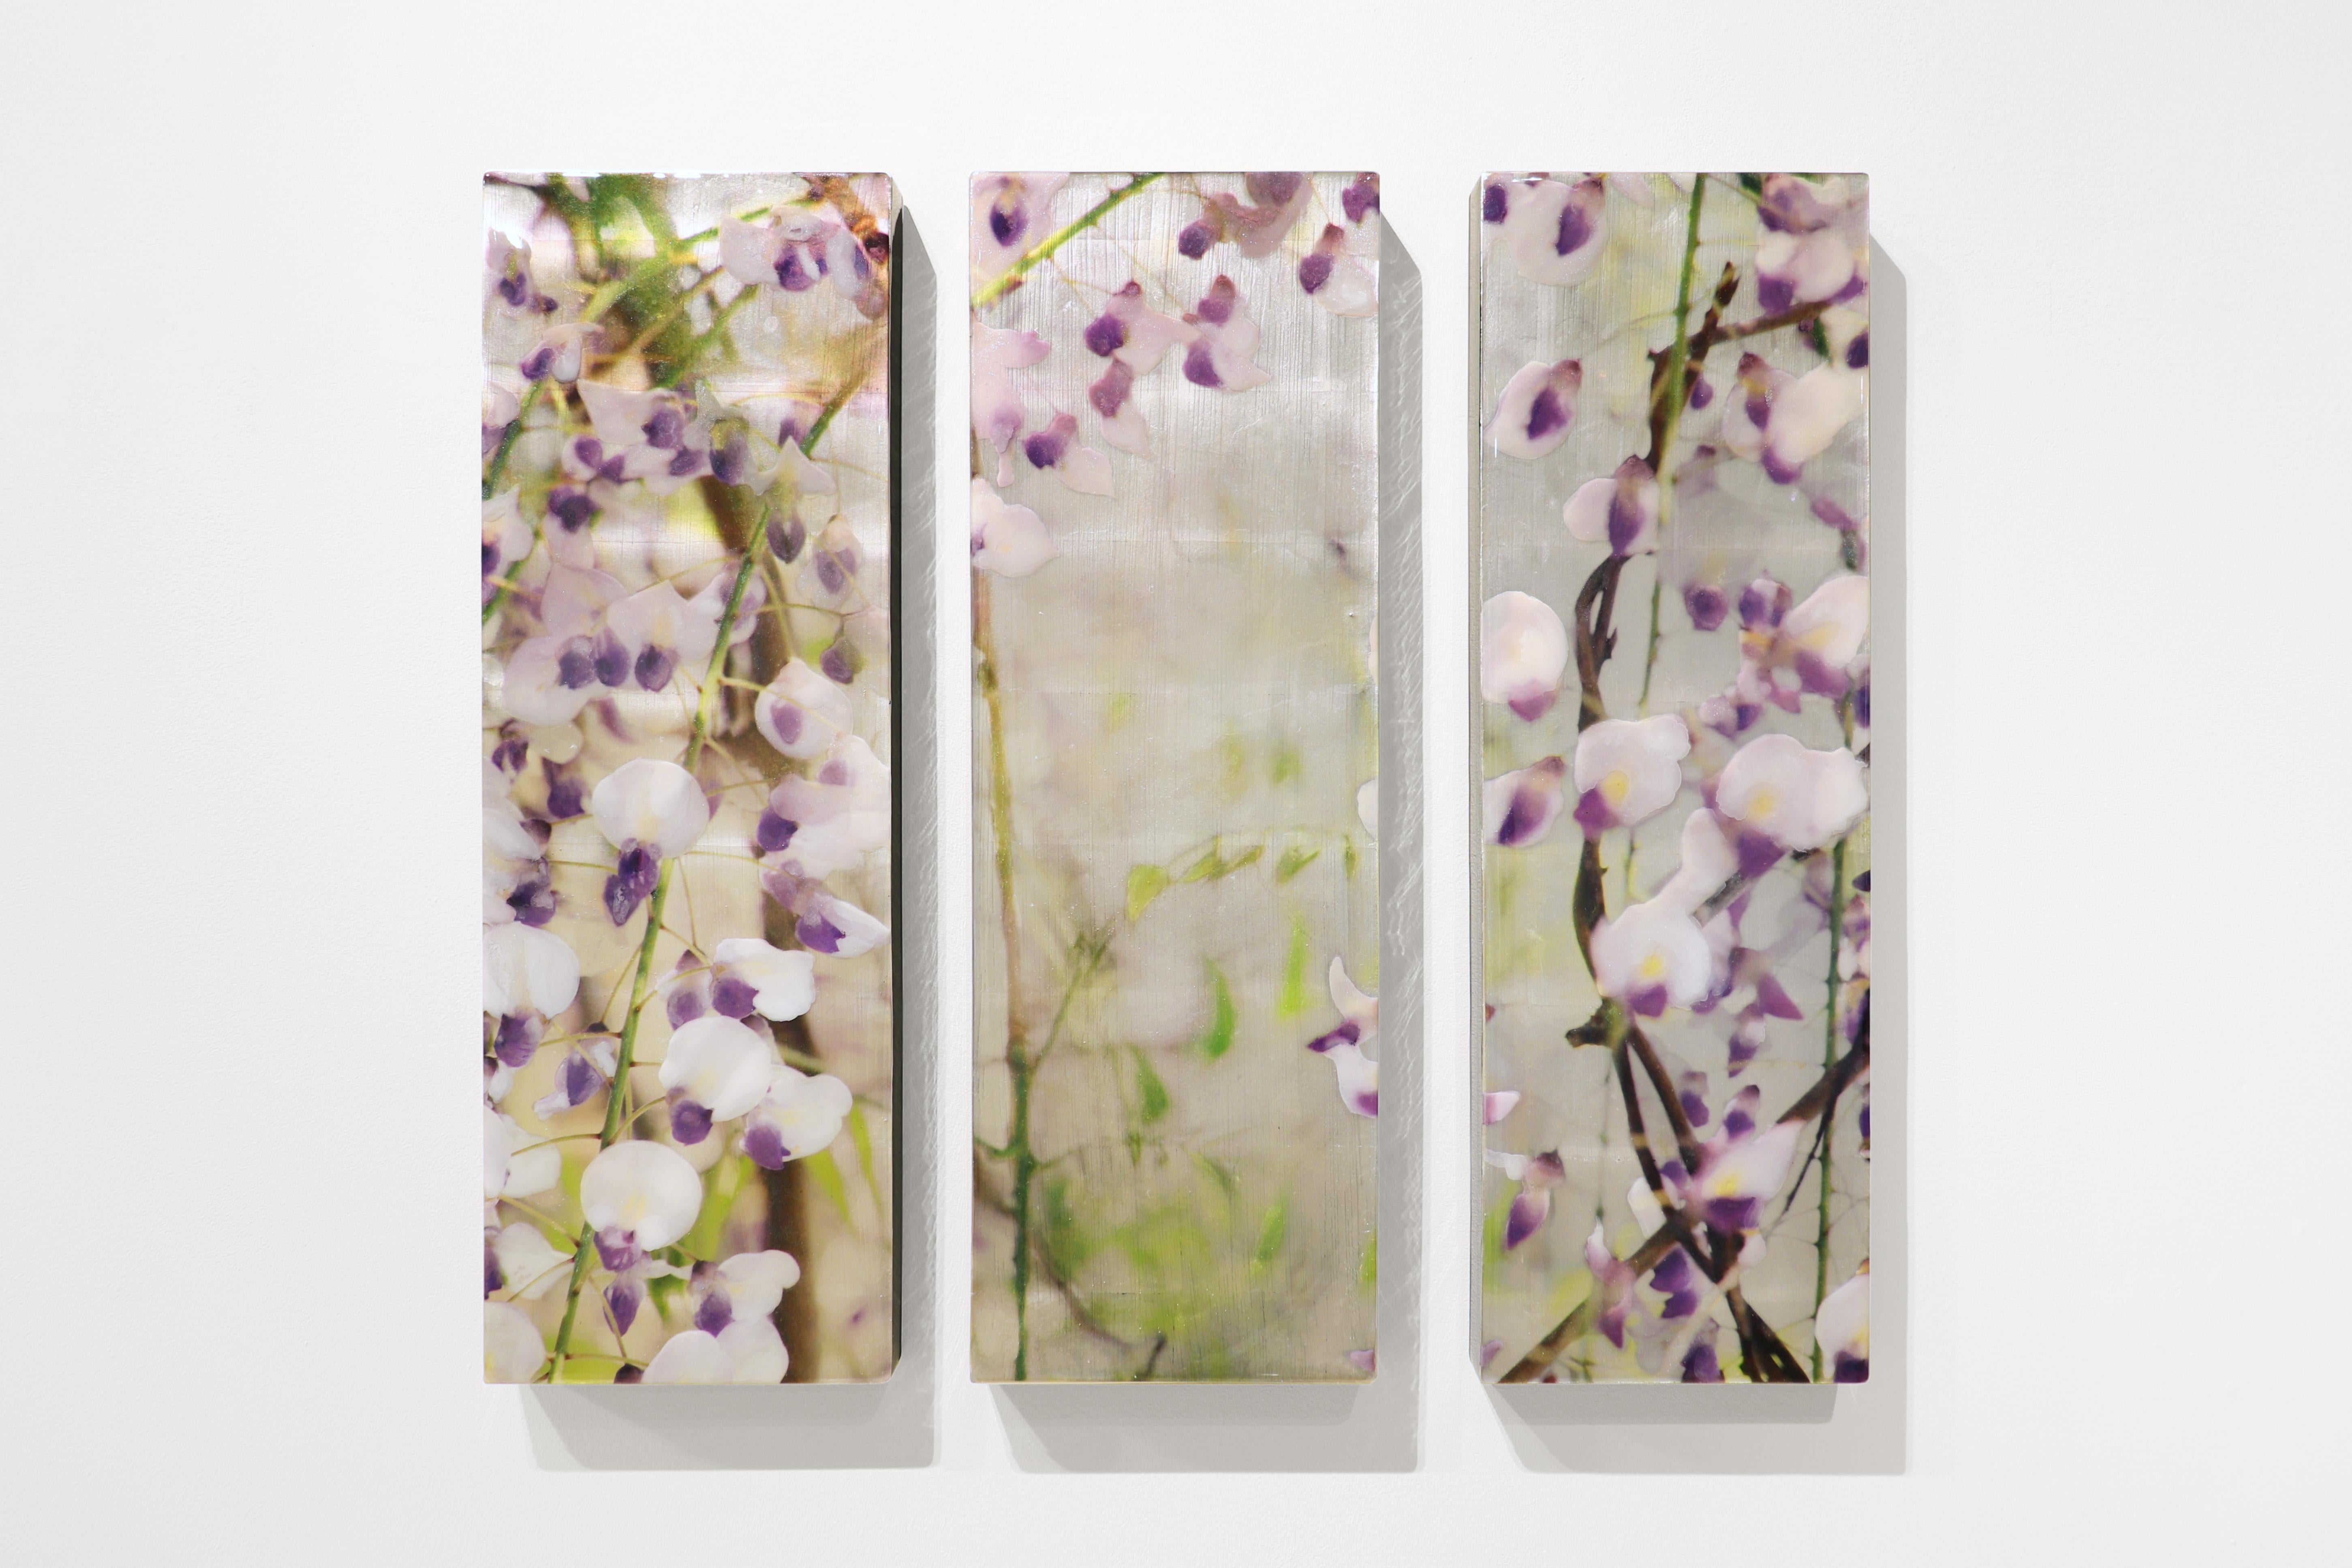 LAVENDER LULLABY (TRIPTYCH), Floral Mixed Media artwork, Purple Wisteria Vines - Painting by Susan Goldsmith